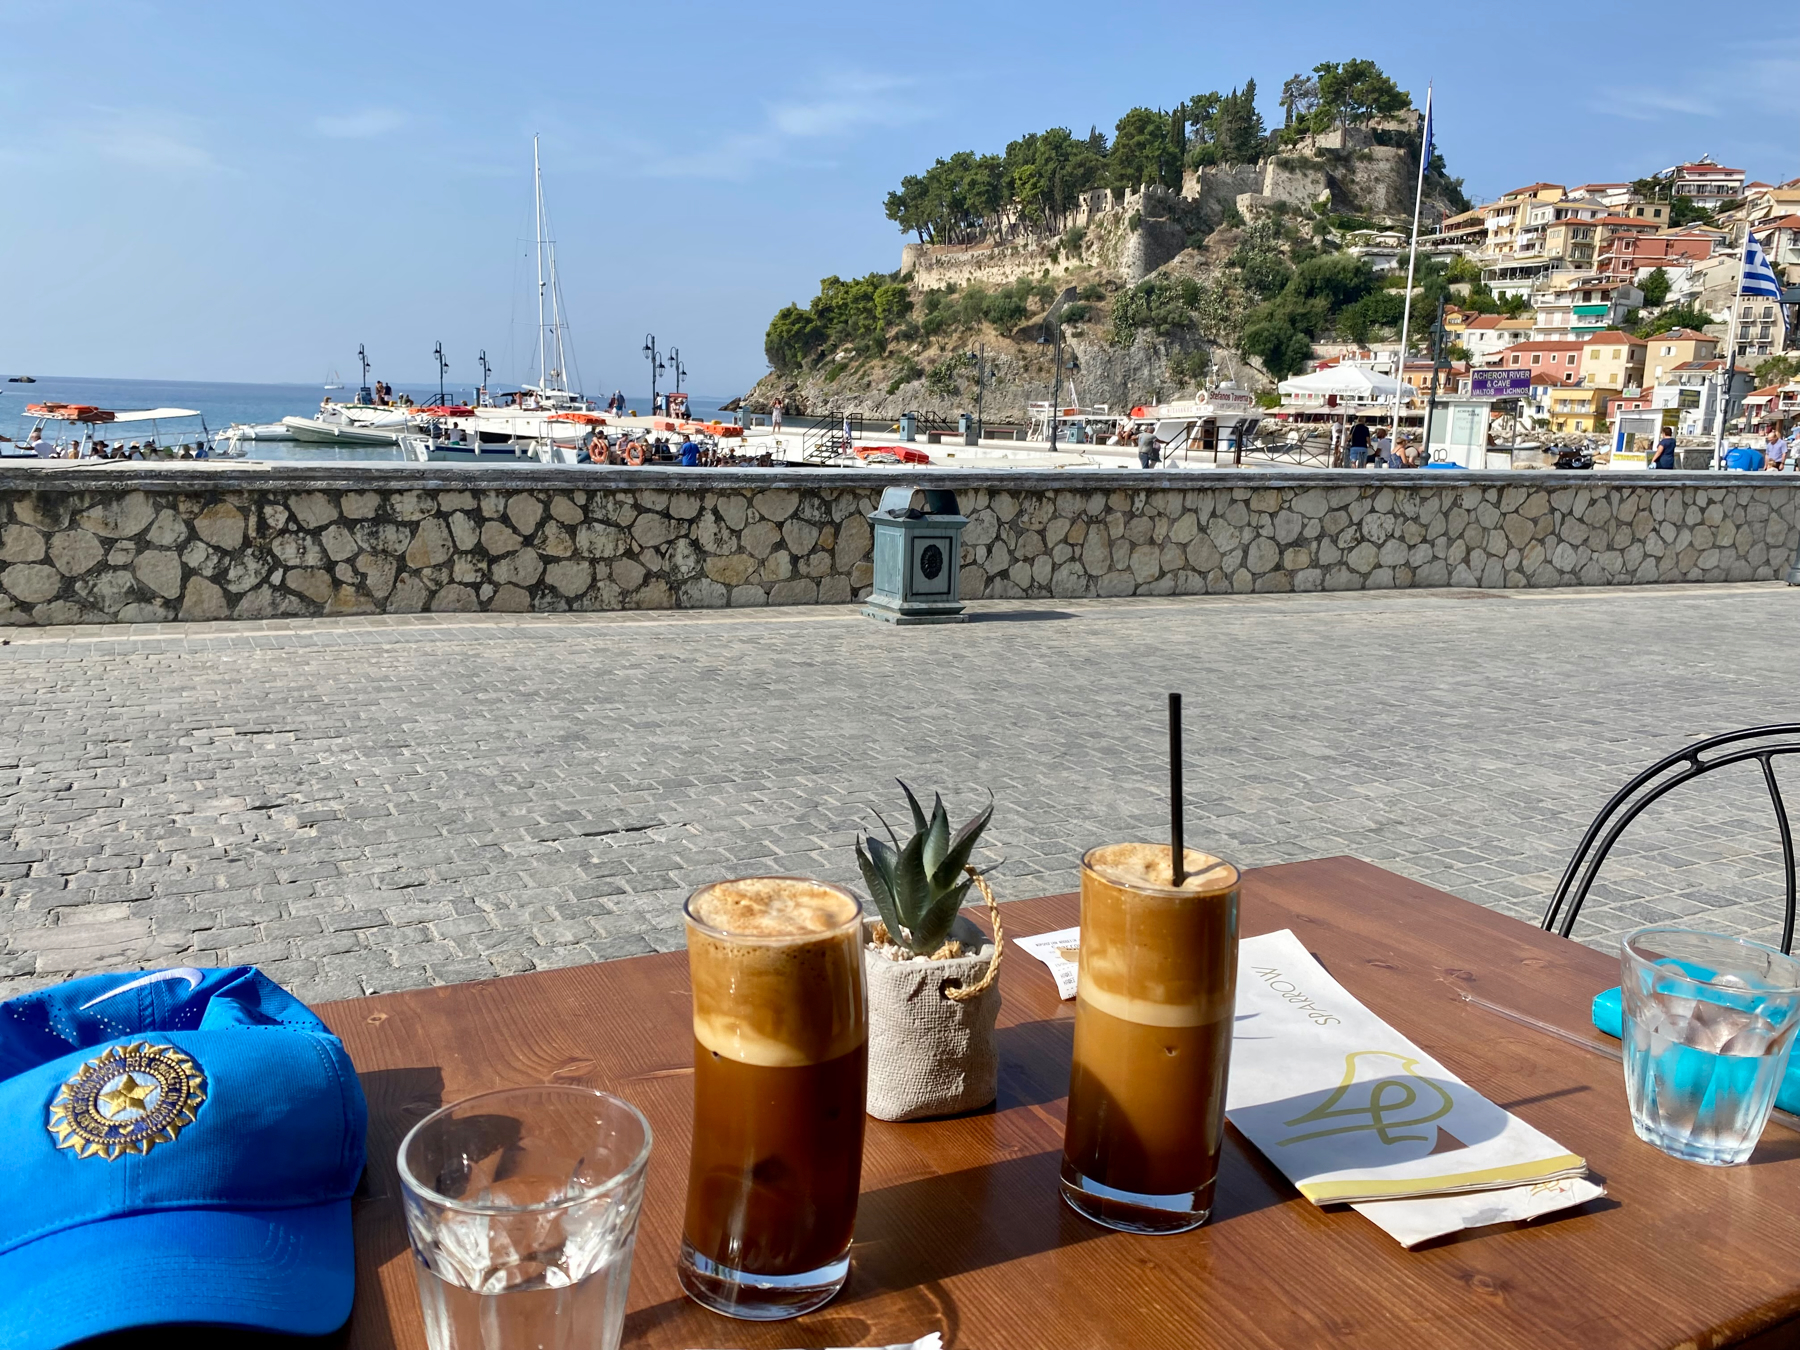 Two glasses of frothy iced coffee on a table overlooking boats in a harbour and castle on a hill